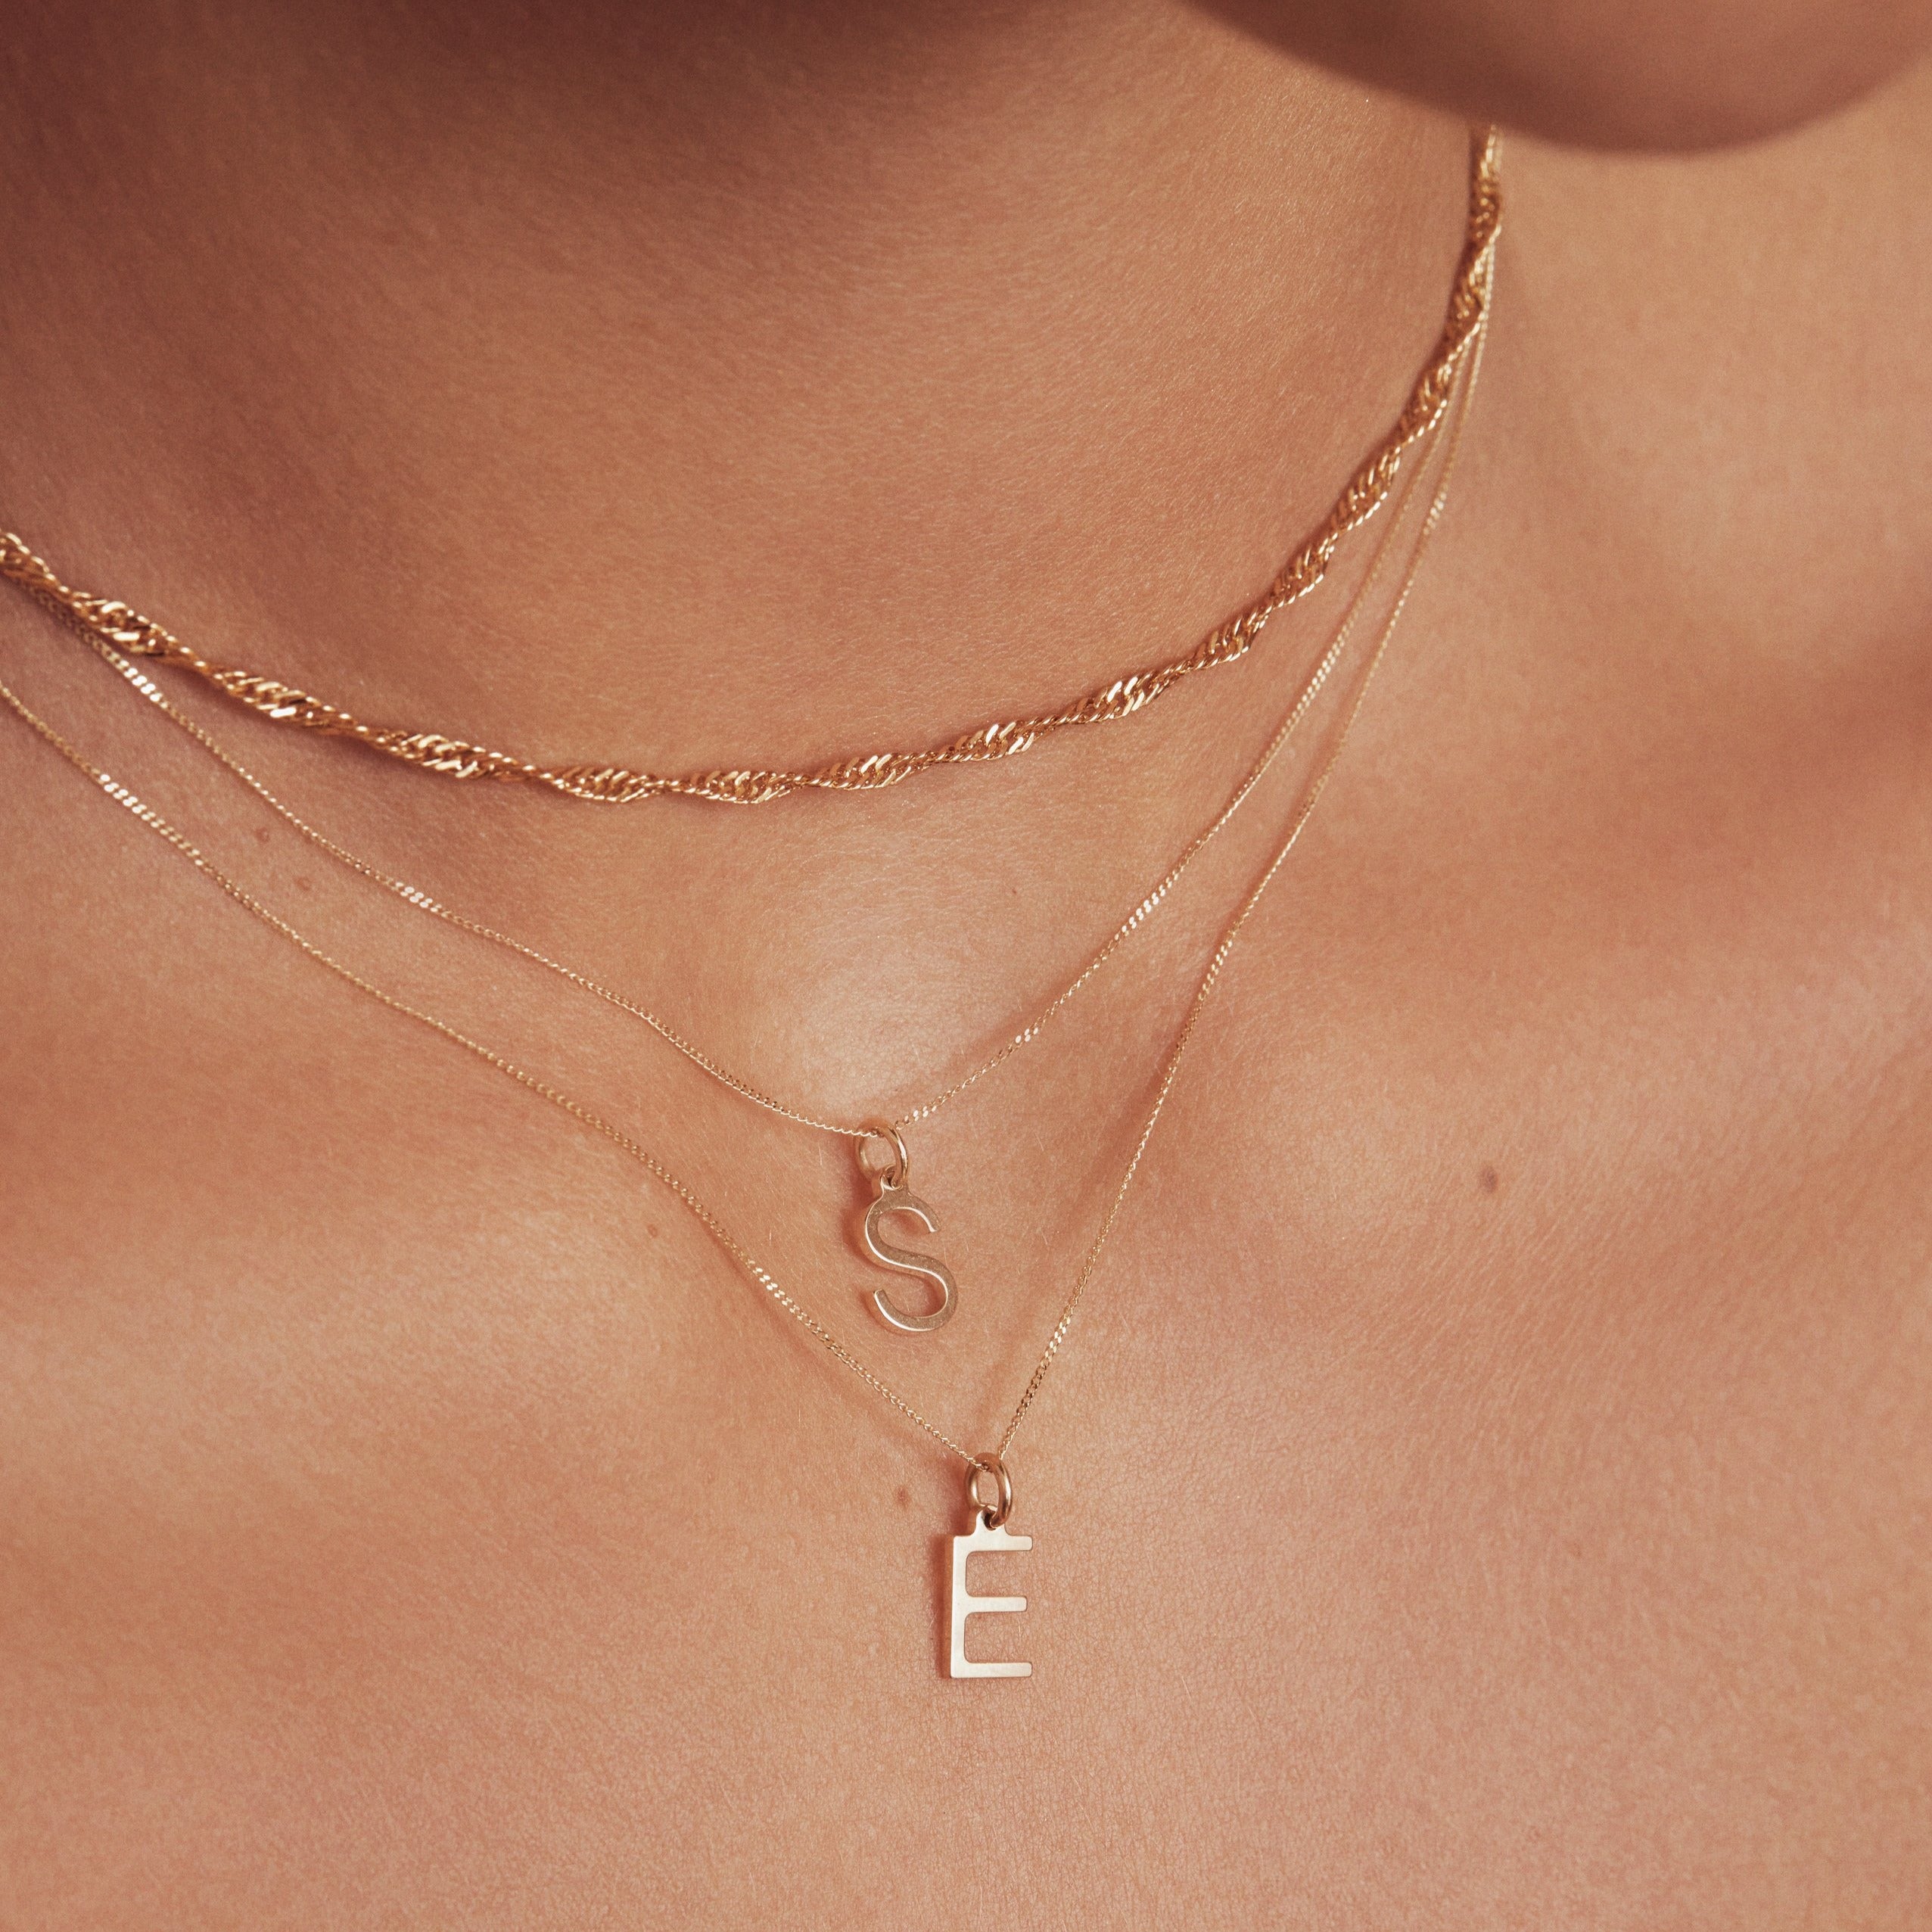 Gold twisted rope chain necklace layered with two gold chains with solid gold individual initial charms 'E' and 'S'